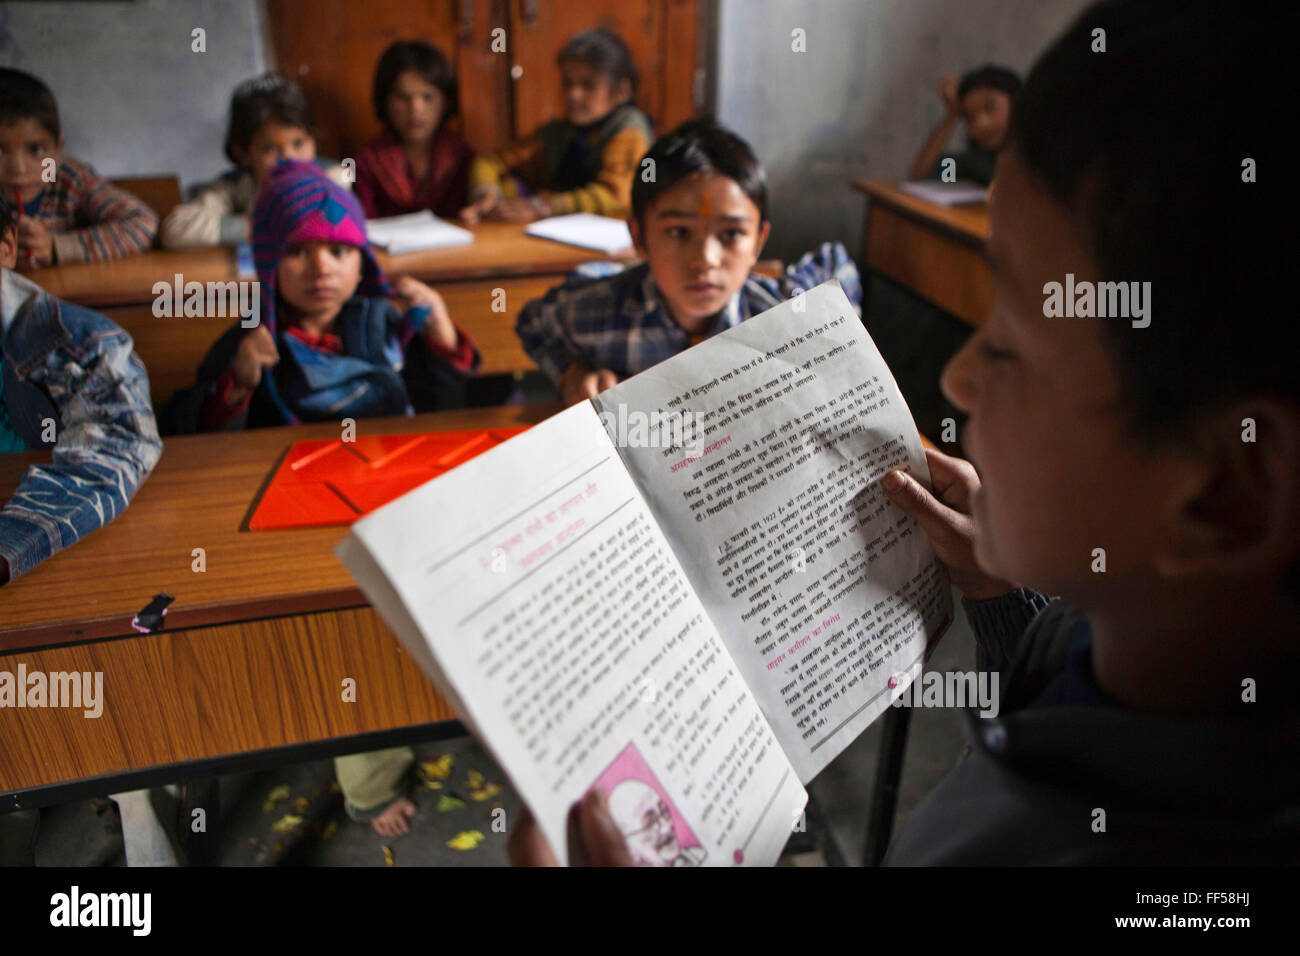 A young boy reading to his class in a lesson at the Alternate Learning Hub, Subhai, Himalayas, India. The school is organized and funded by the Pragya charity.  Pragya is a non-profit organization providing education and information services in high altitude areas in the Himalayas. Stock Photo